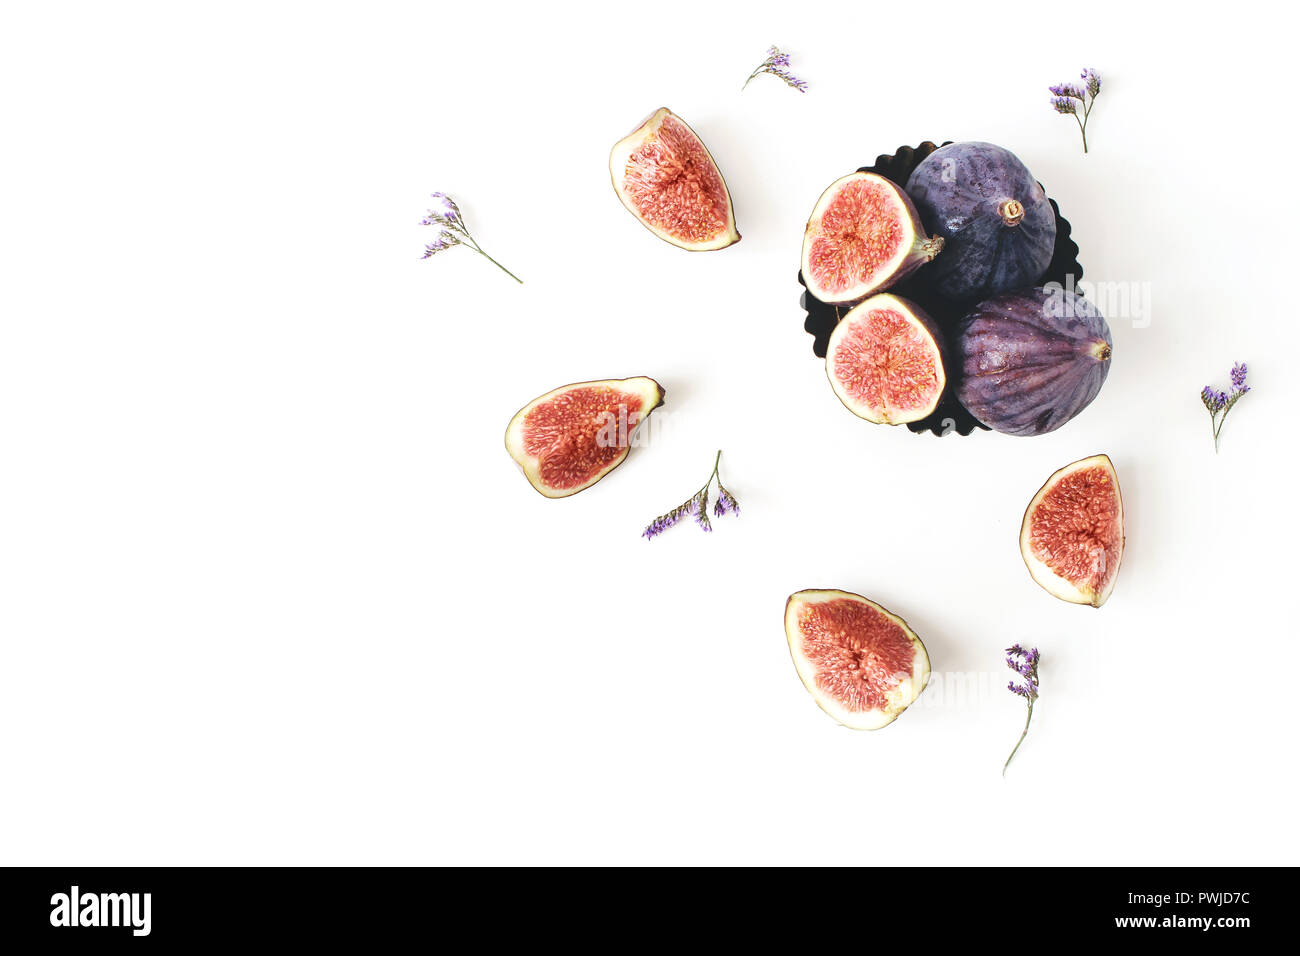 Fresh ripe purple figs composition. Food Photo. Sliced and whole exotic fruit in vintage bowl. Limonium flowers on a white table background. Floral pa Stock Photo